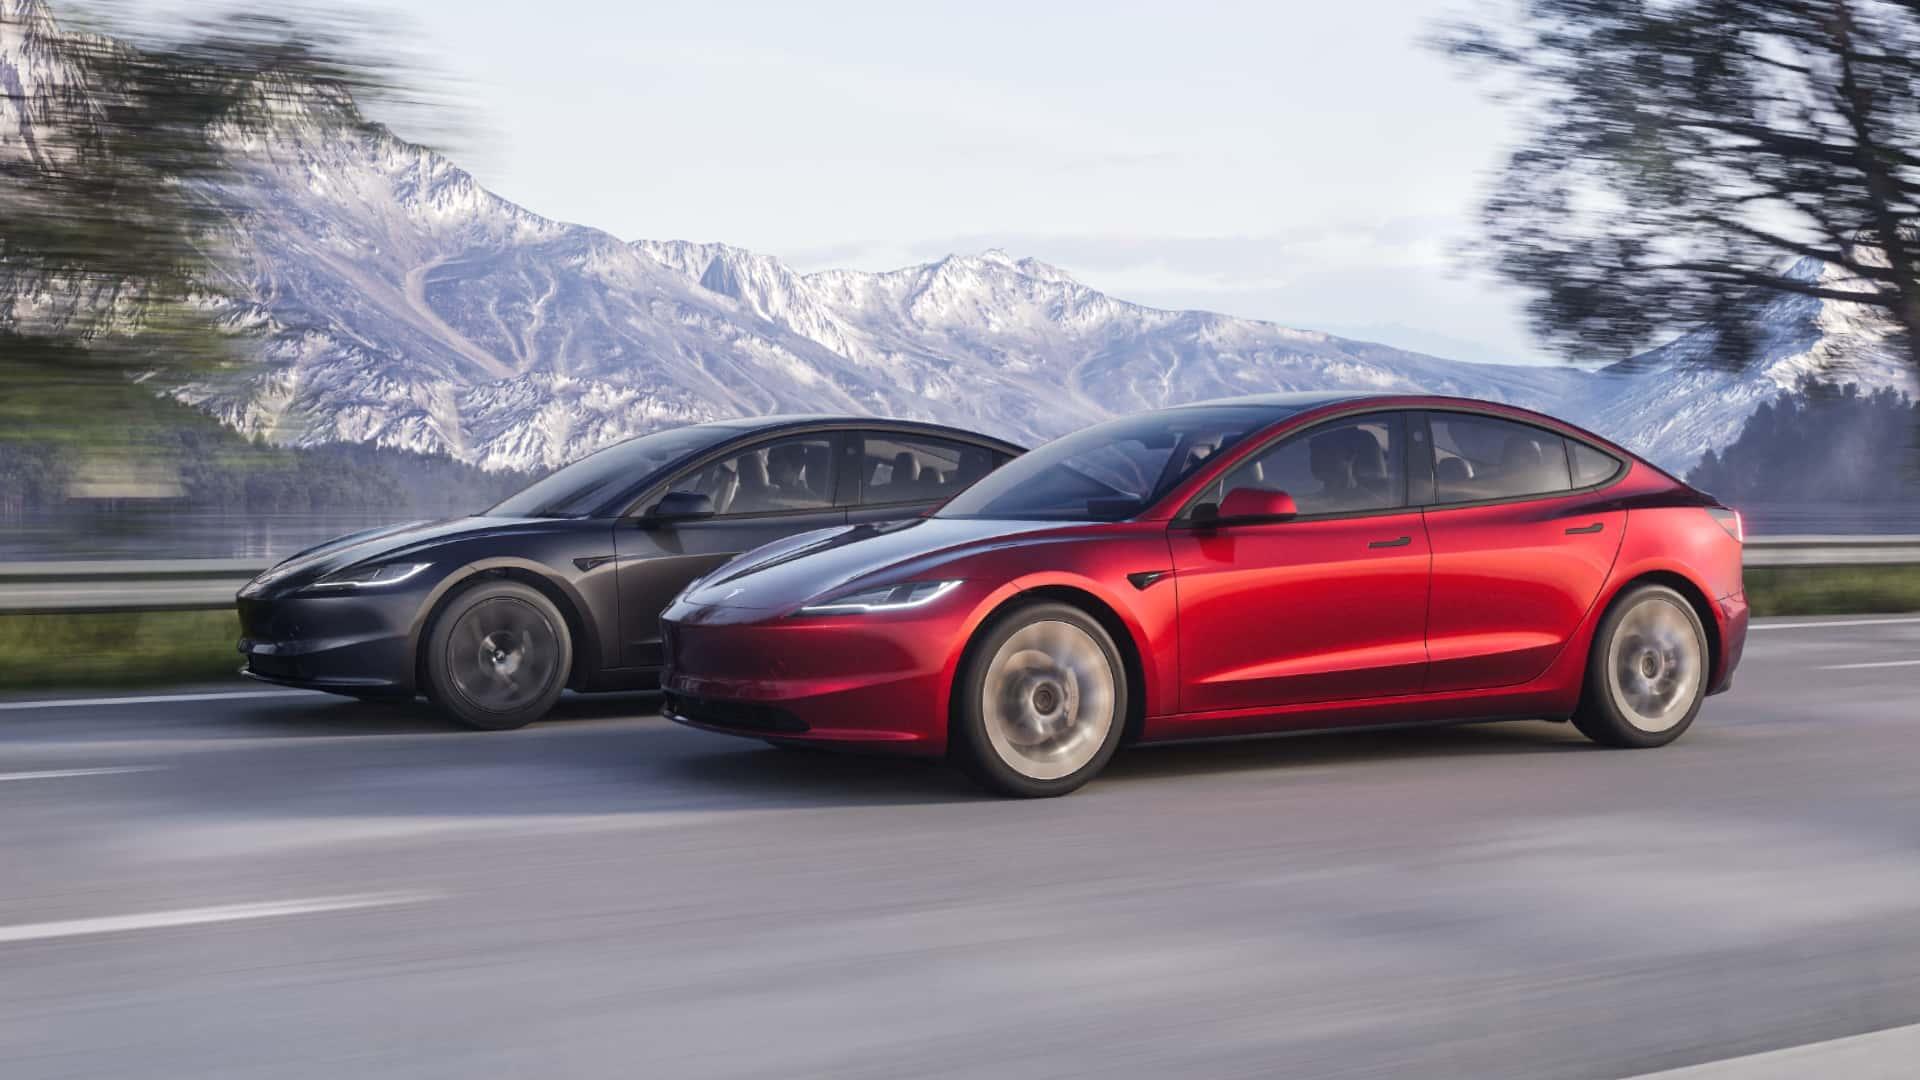 New Tesla Model 3 variant for Europe - rear-wheel drive with large